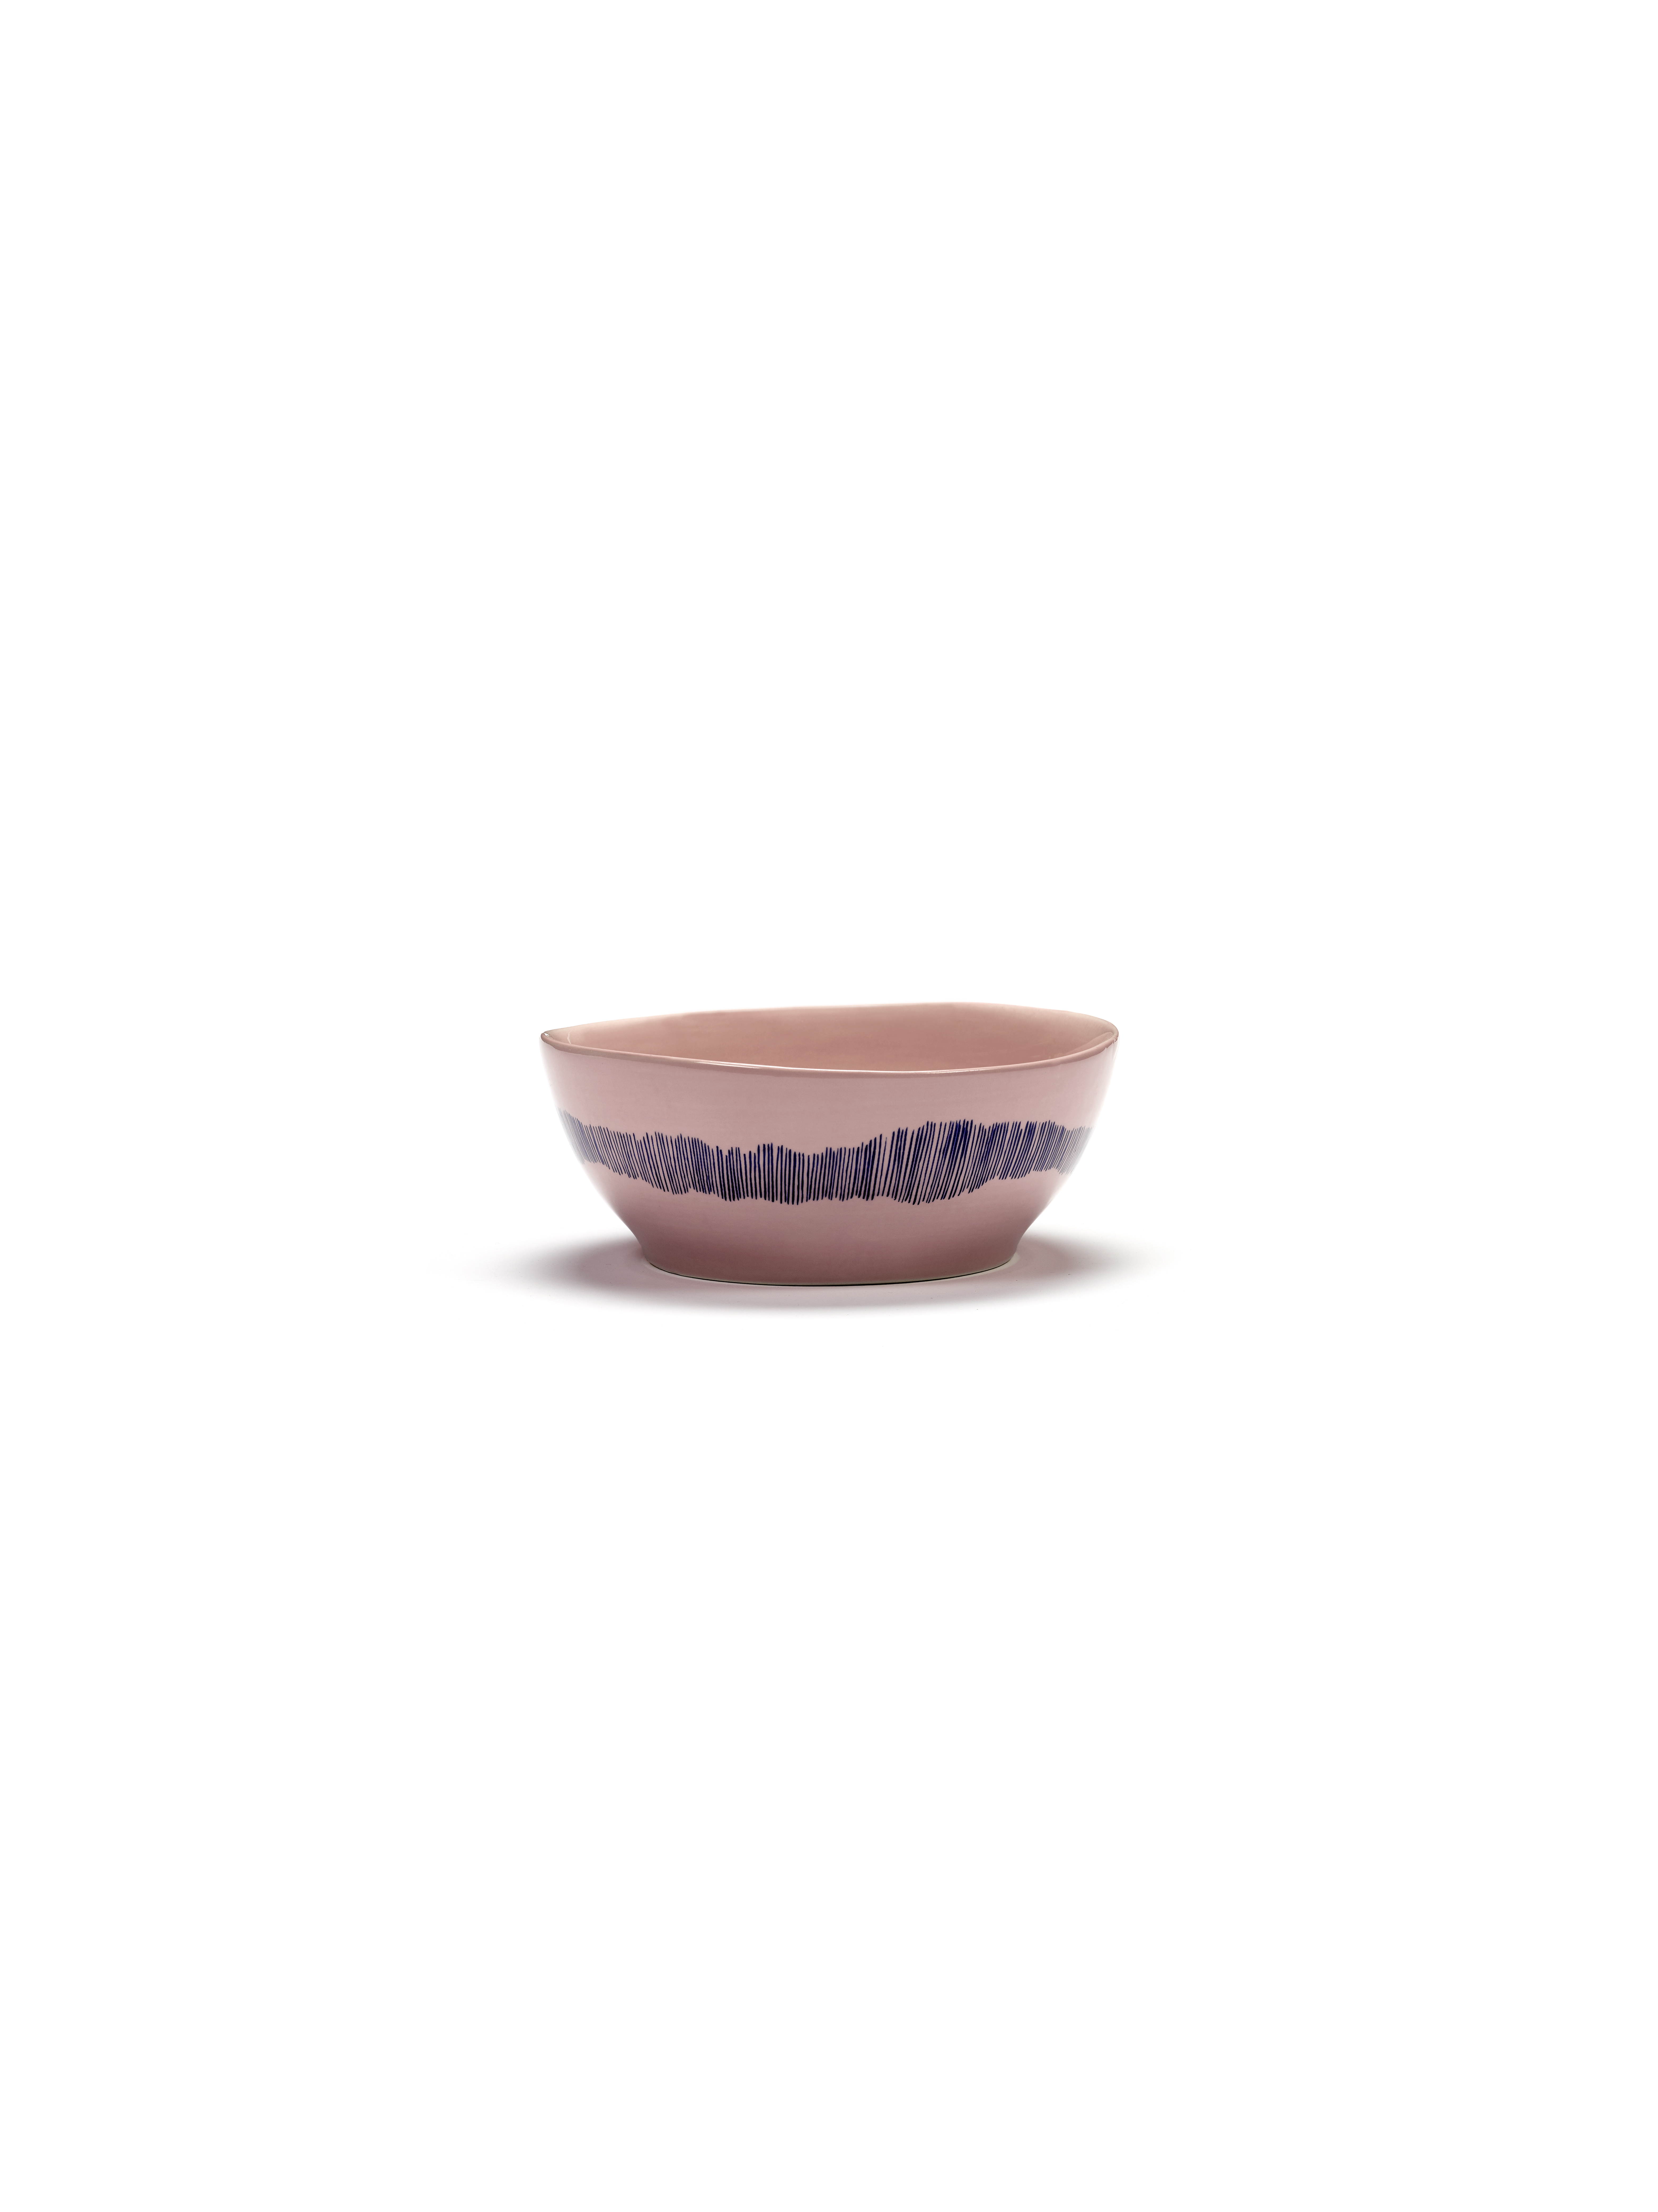 Serax Ottolenghi Set of 4 Feast Bowls in Delicious Pink